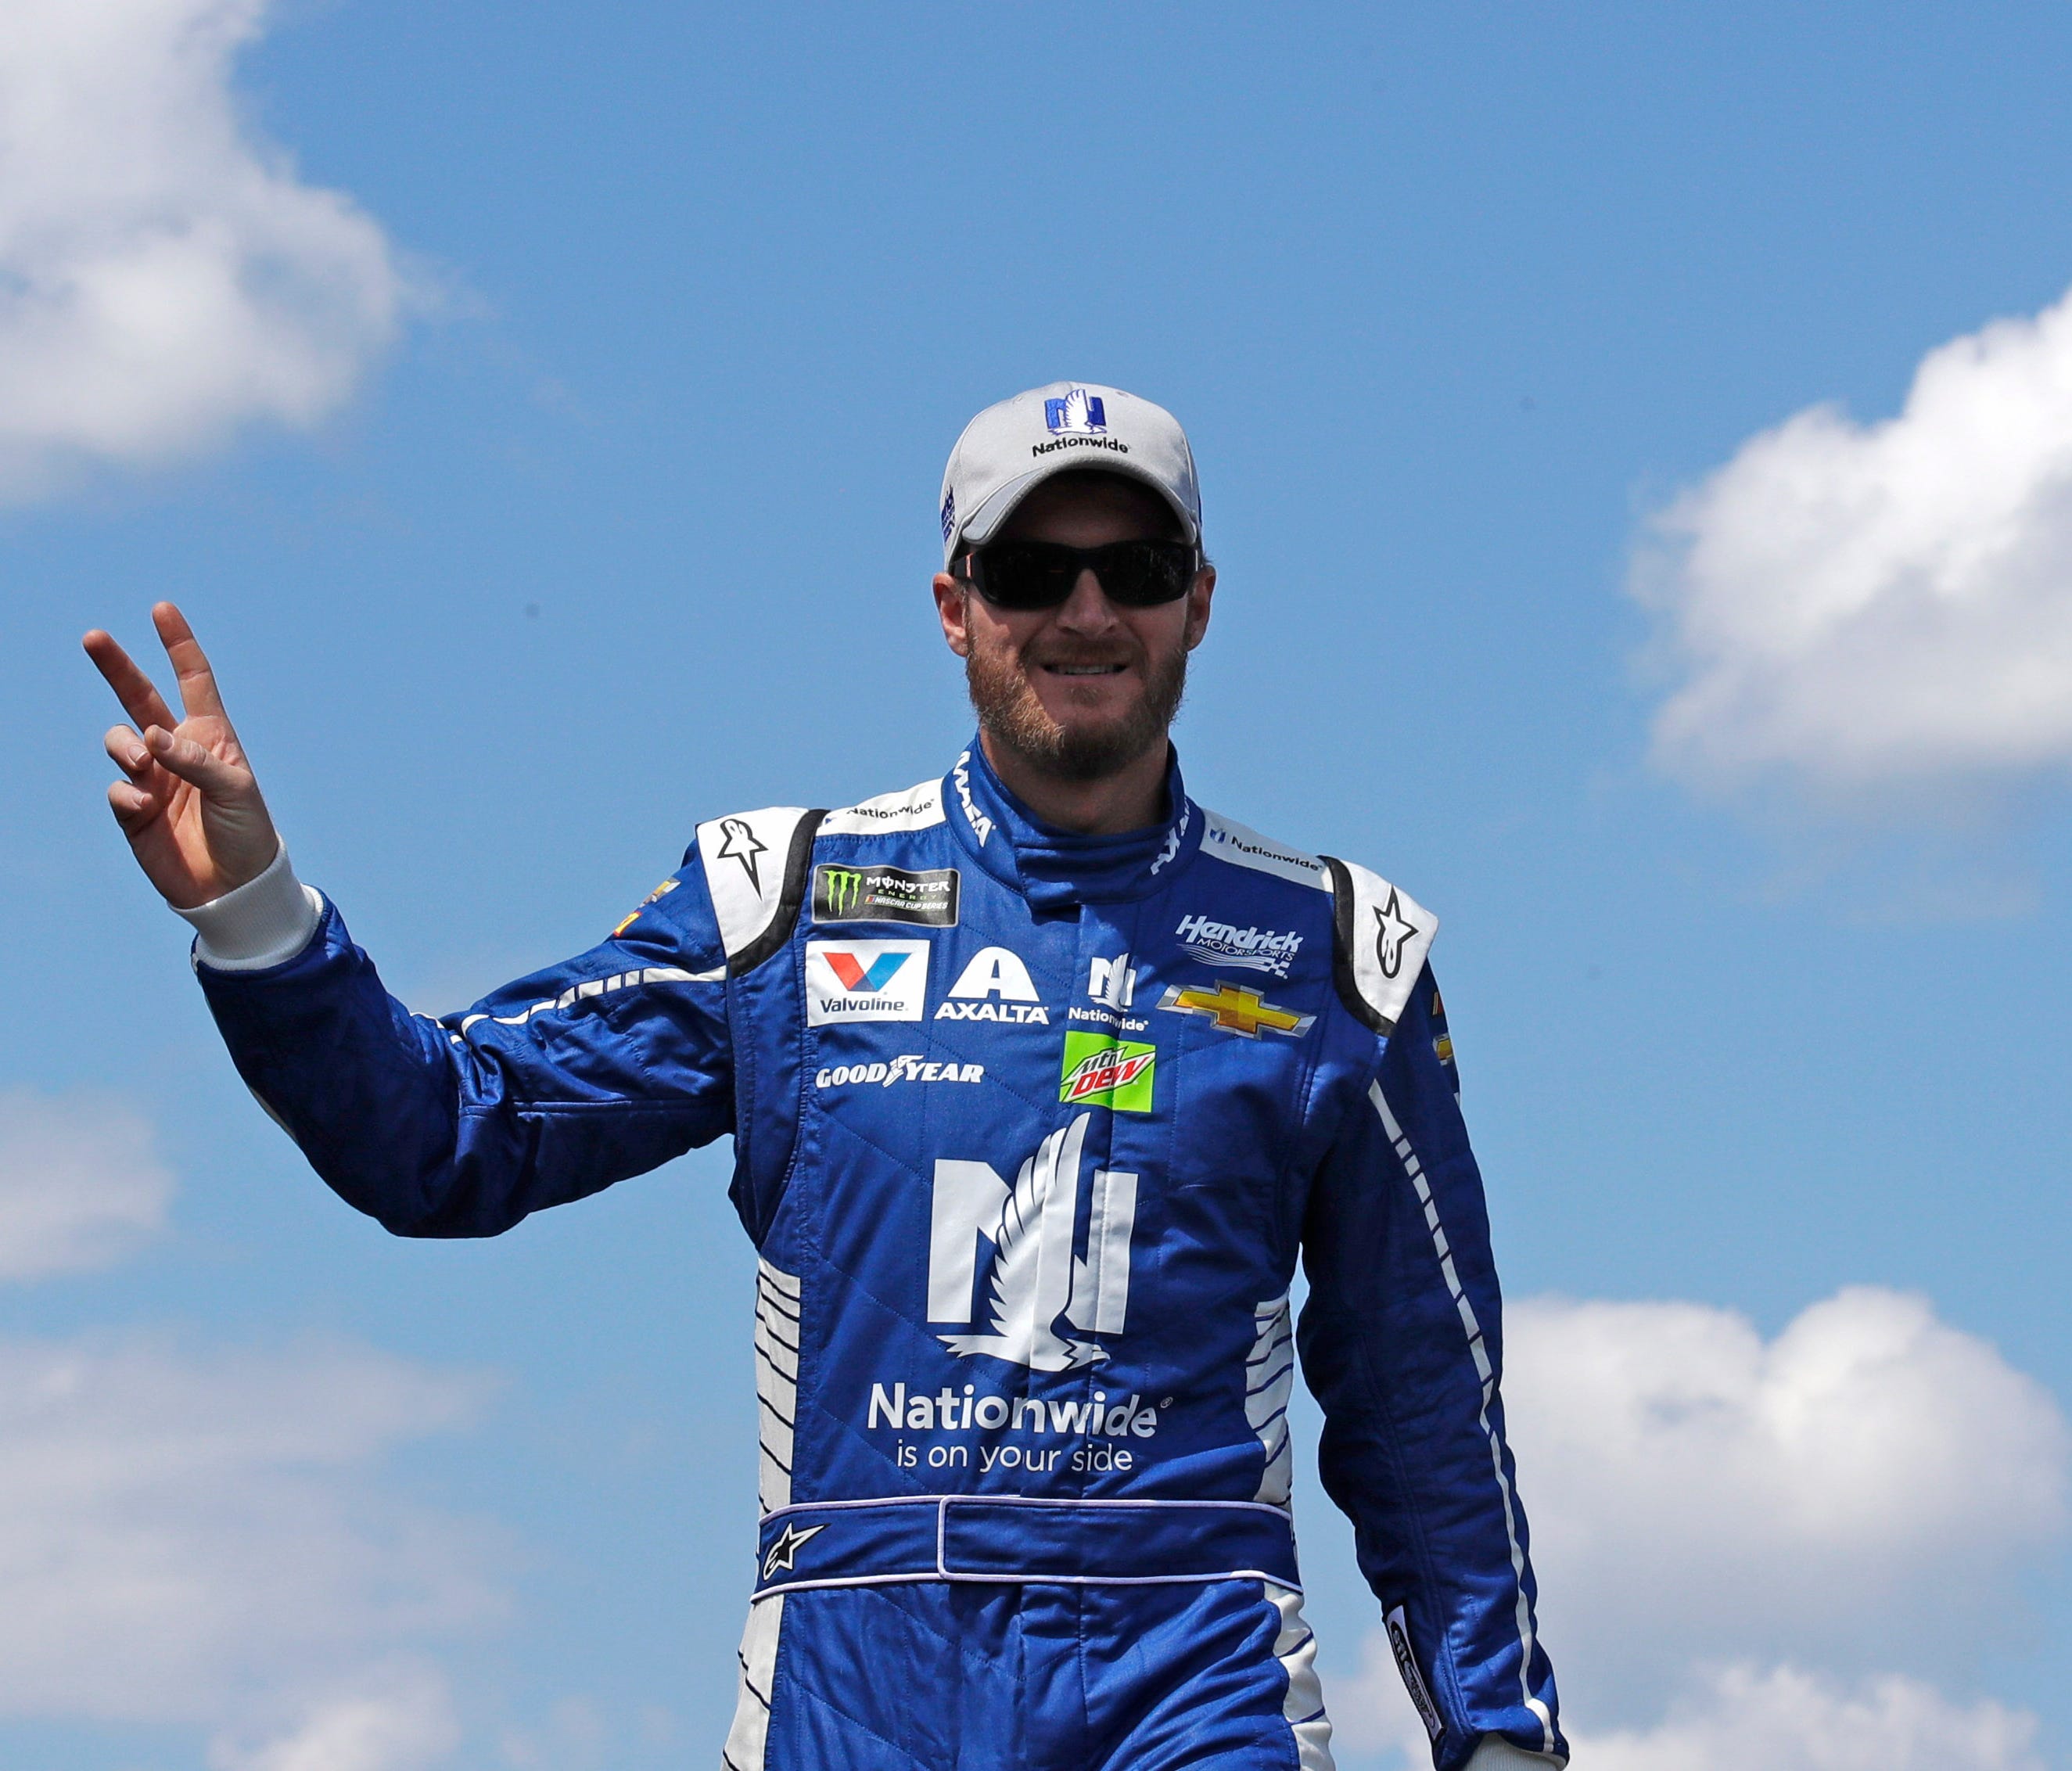 Dale Earnhardt Jr. will work for NBC after his racing career ends.